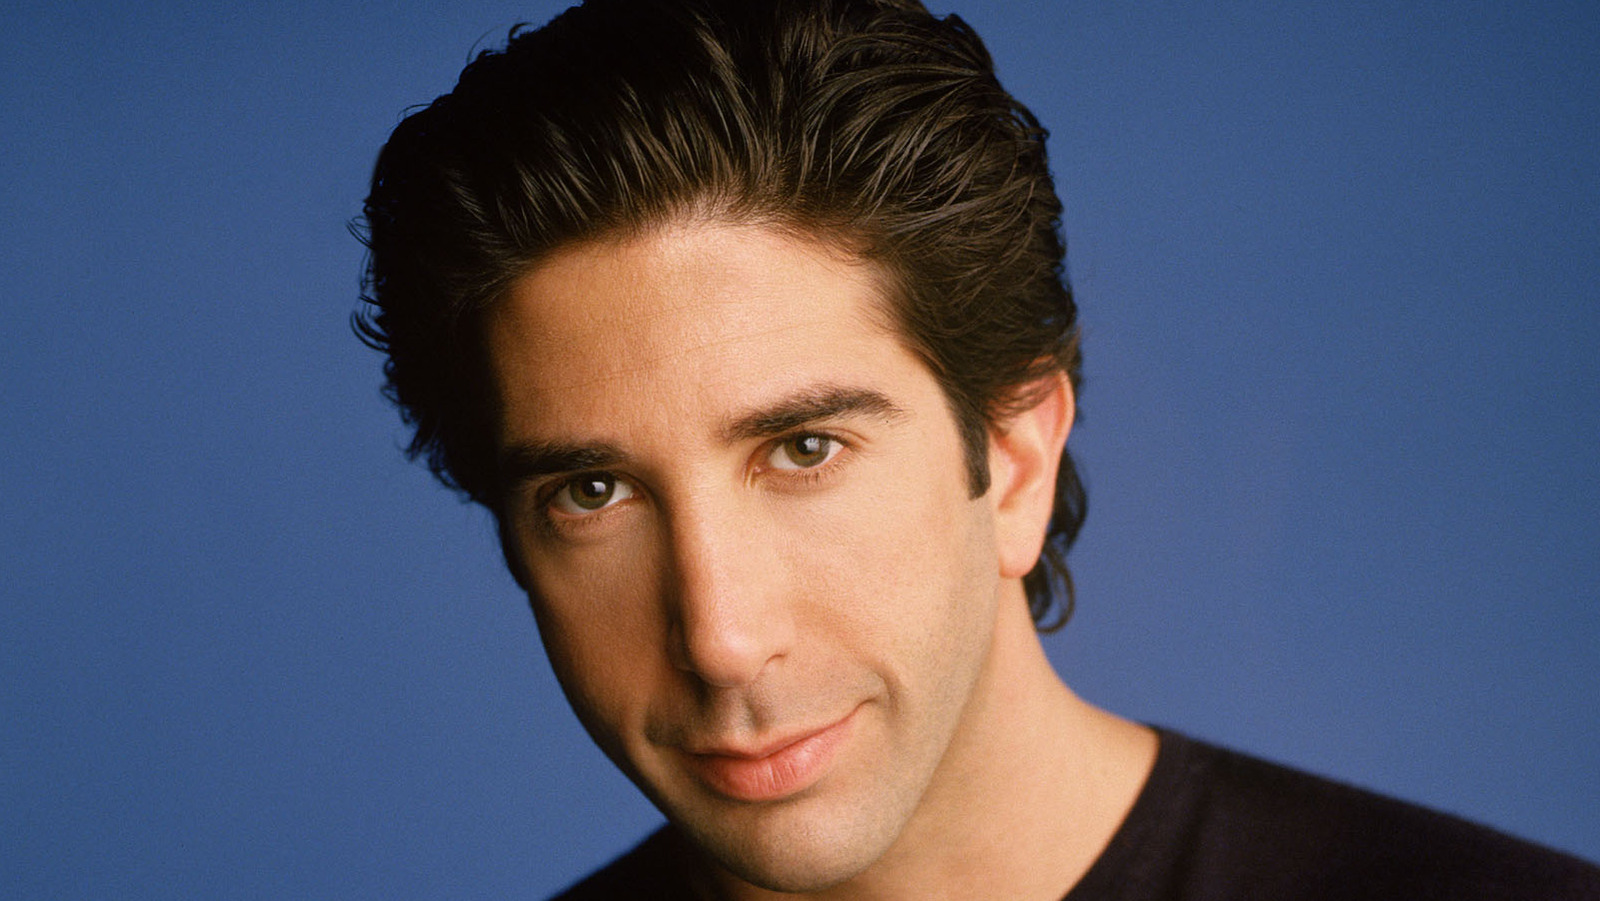 Why He Slept With Xerox Girl-Unknown Facts About Ross Geller from Friends